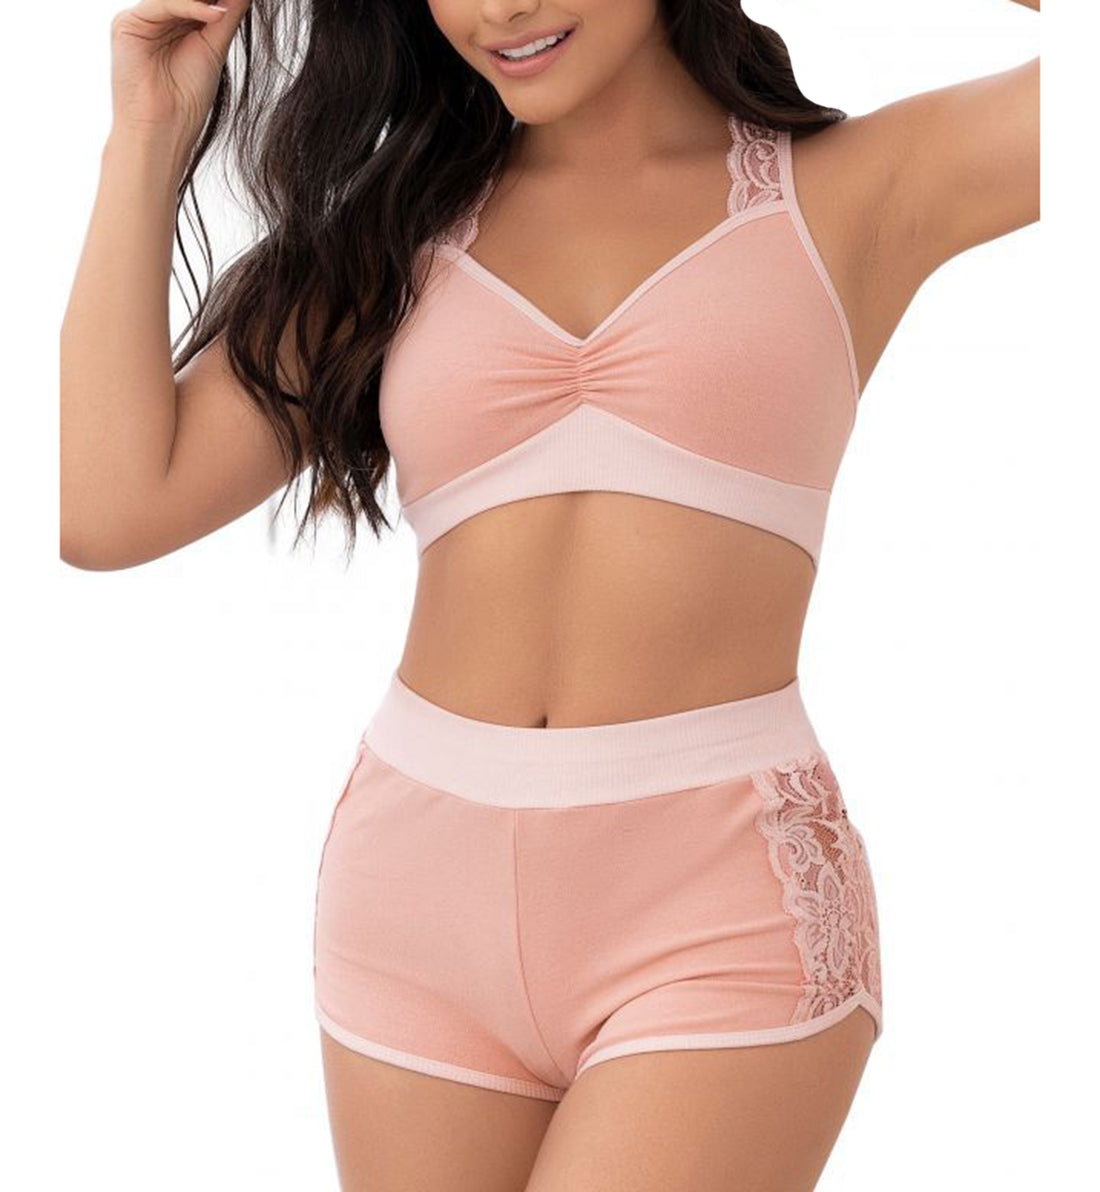 Mapale 2 Piece PJ Set: Racer Crop Top & Cheeky Short (7389),Small,Rose - Rose,Small